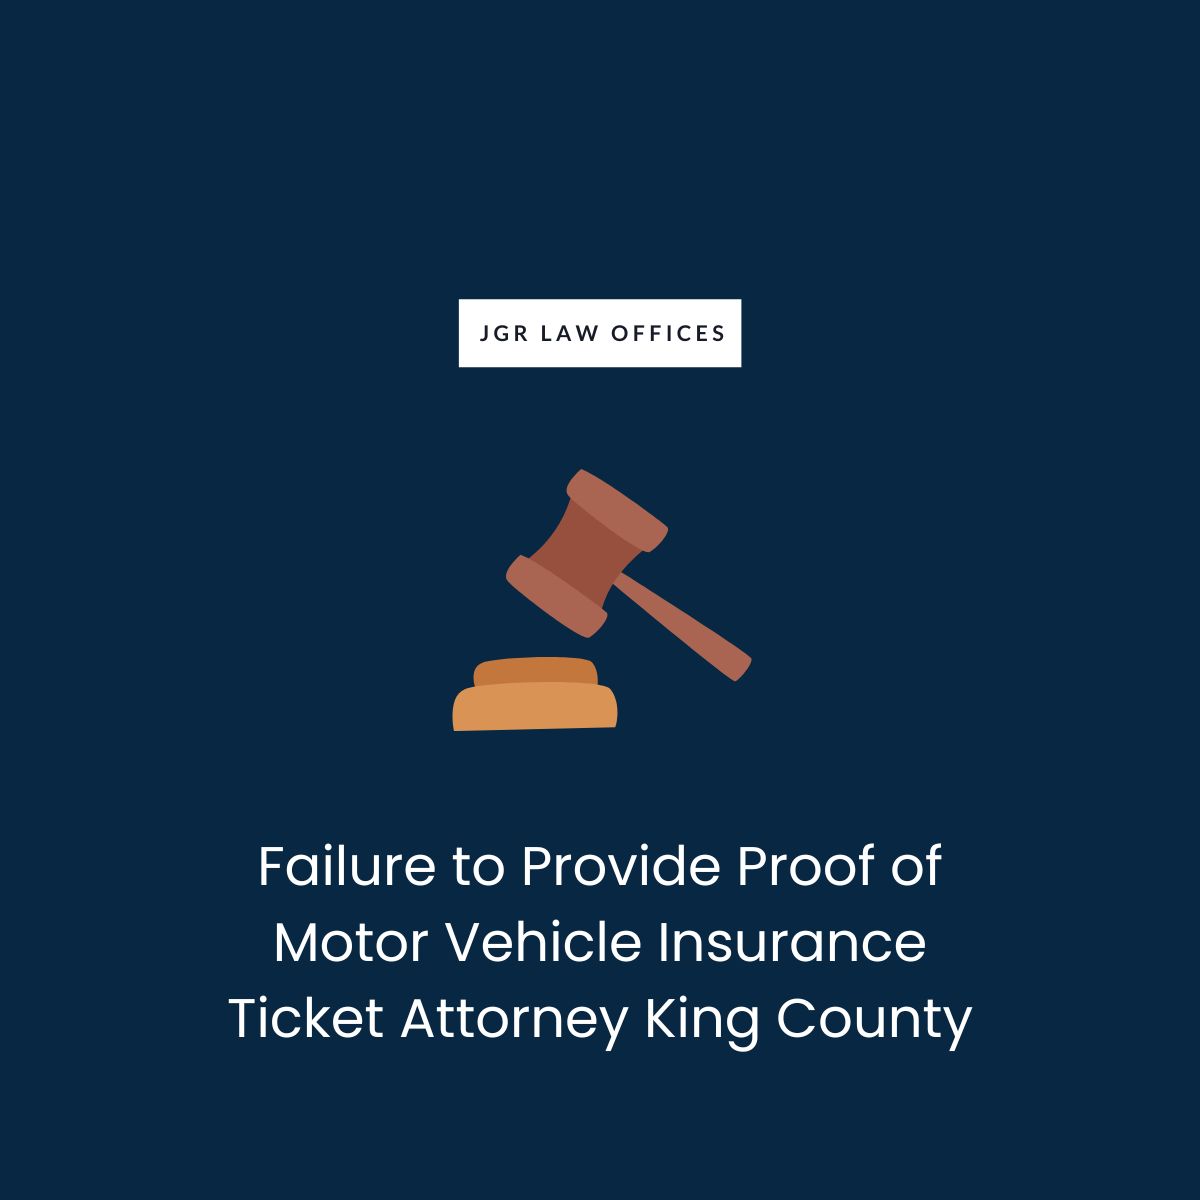 Failure to Provide Proof of Motor Vehicle Insurance Ticket Attorney King County